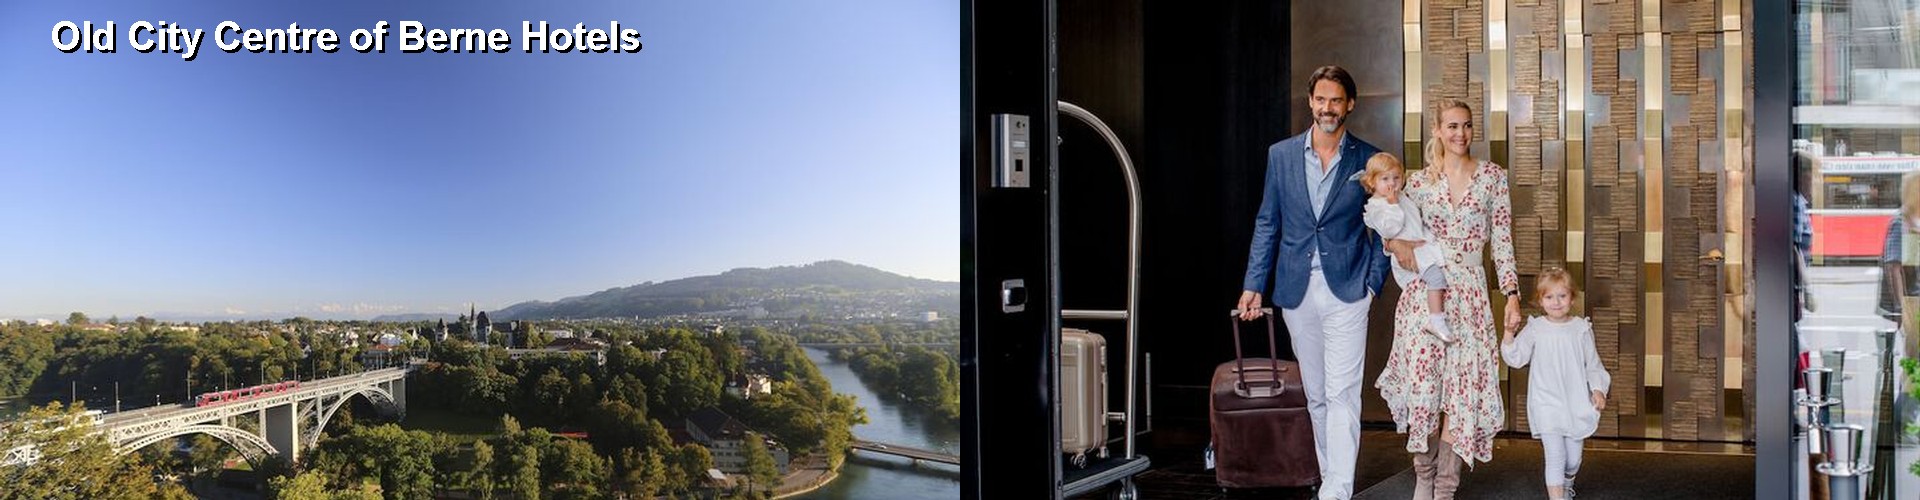 5 Best Hotels near Old City Centre of Berne